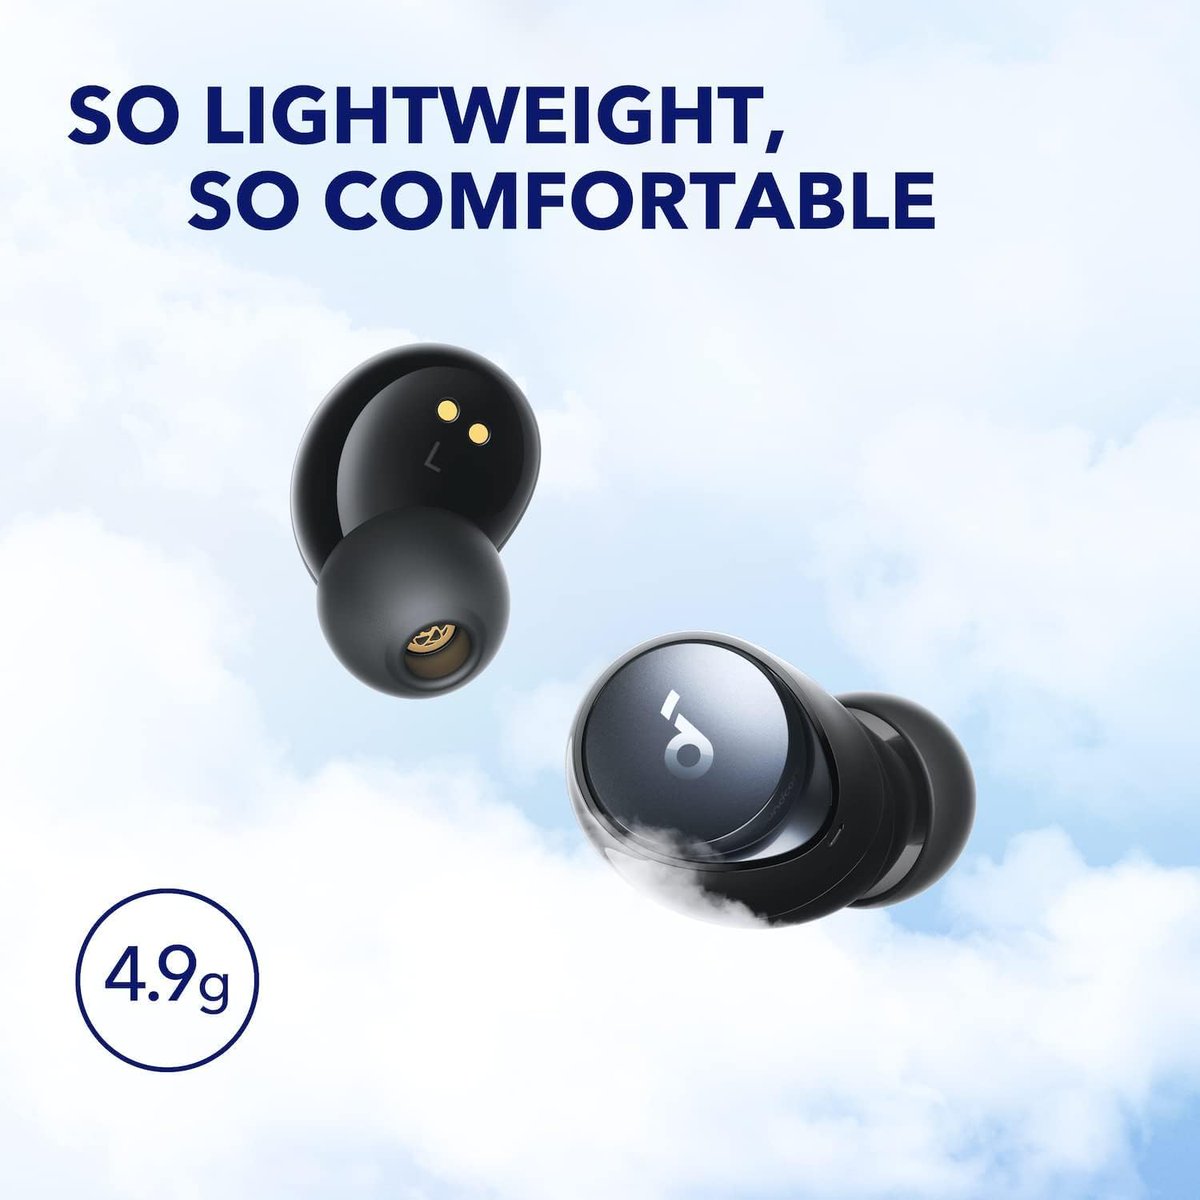 Soundcore Wireless Earbuds 🎶🎧

Immerse Yourself in Superior Sound Quality

Check Full Details - tinyurl.com/38a8y72s

#earbuds #soundcore #wireless #bestearbuds #soundcoreearbuds #tech #earbudsreview